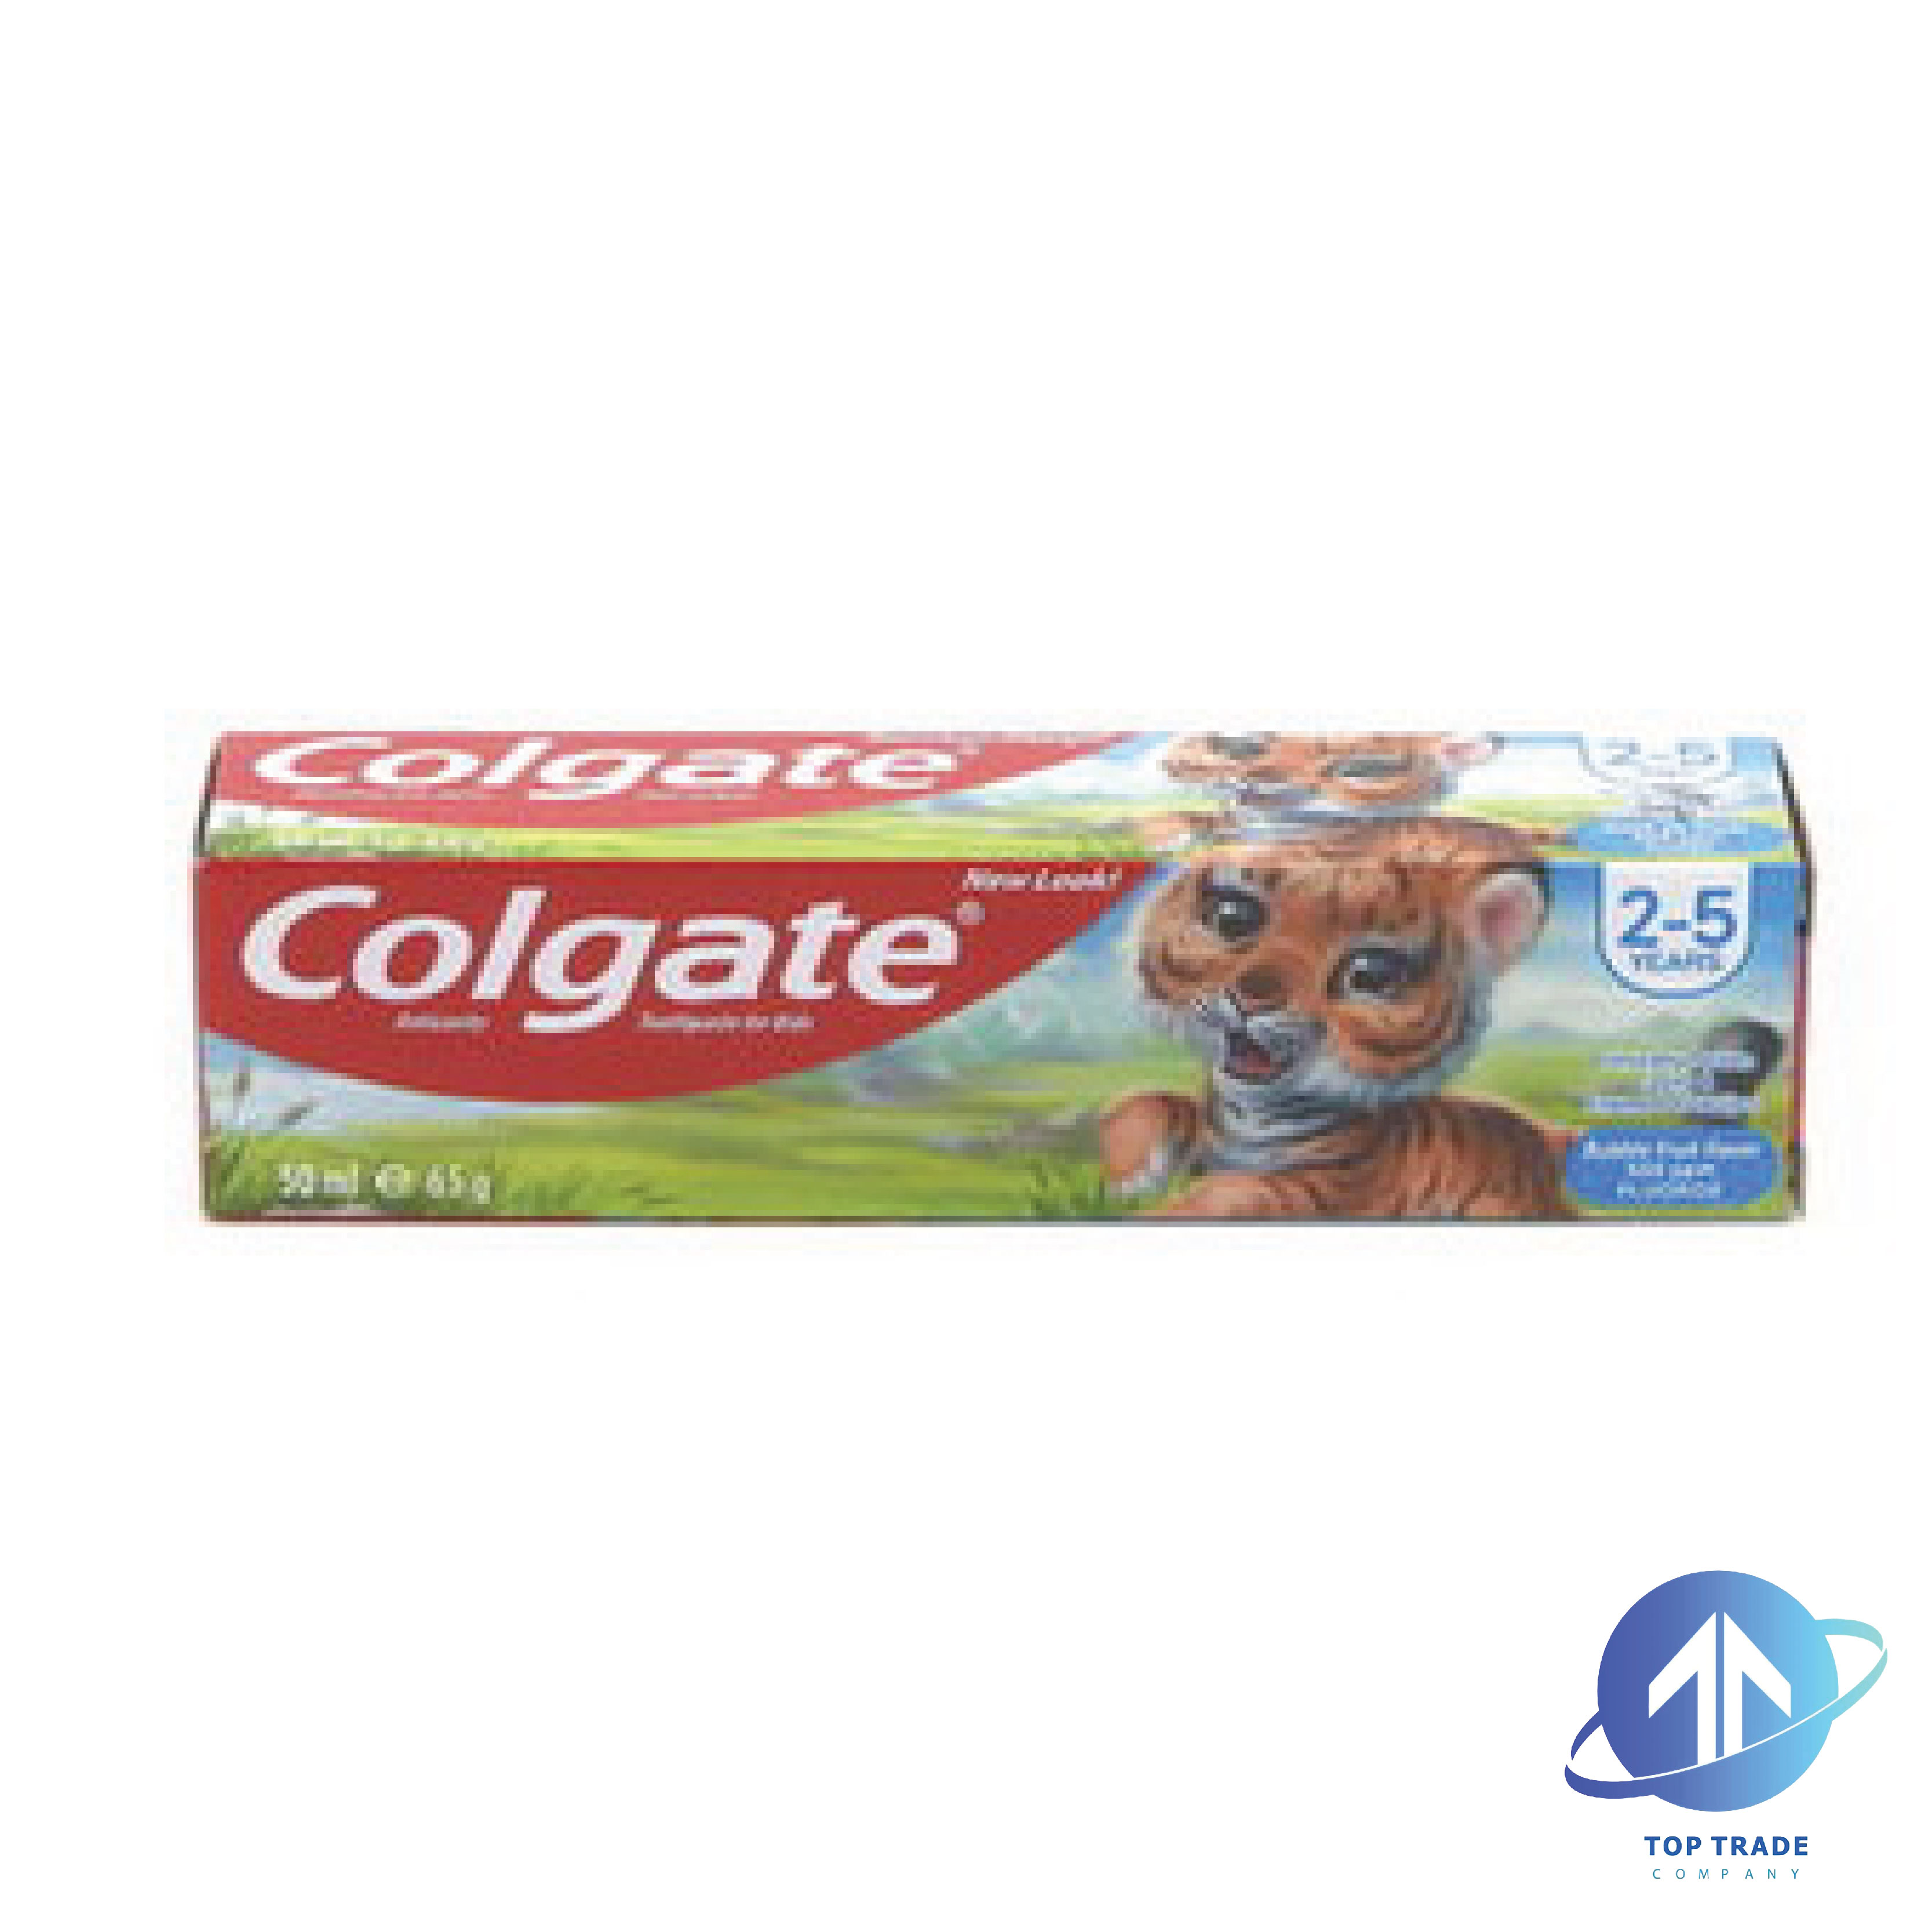 Colgate toothpaste Bubble Fruit 50ml kids 2-5 years